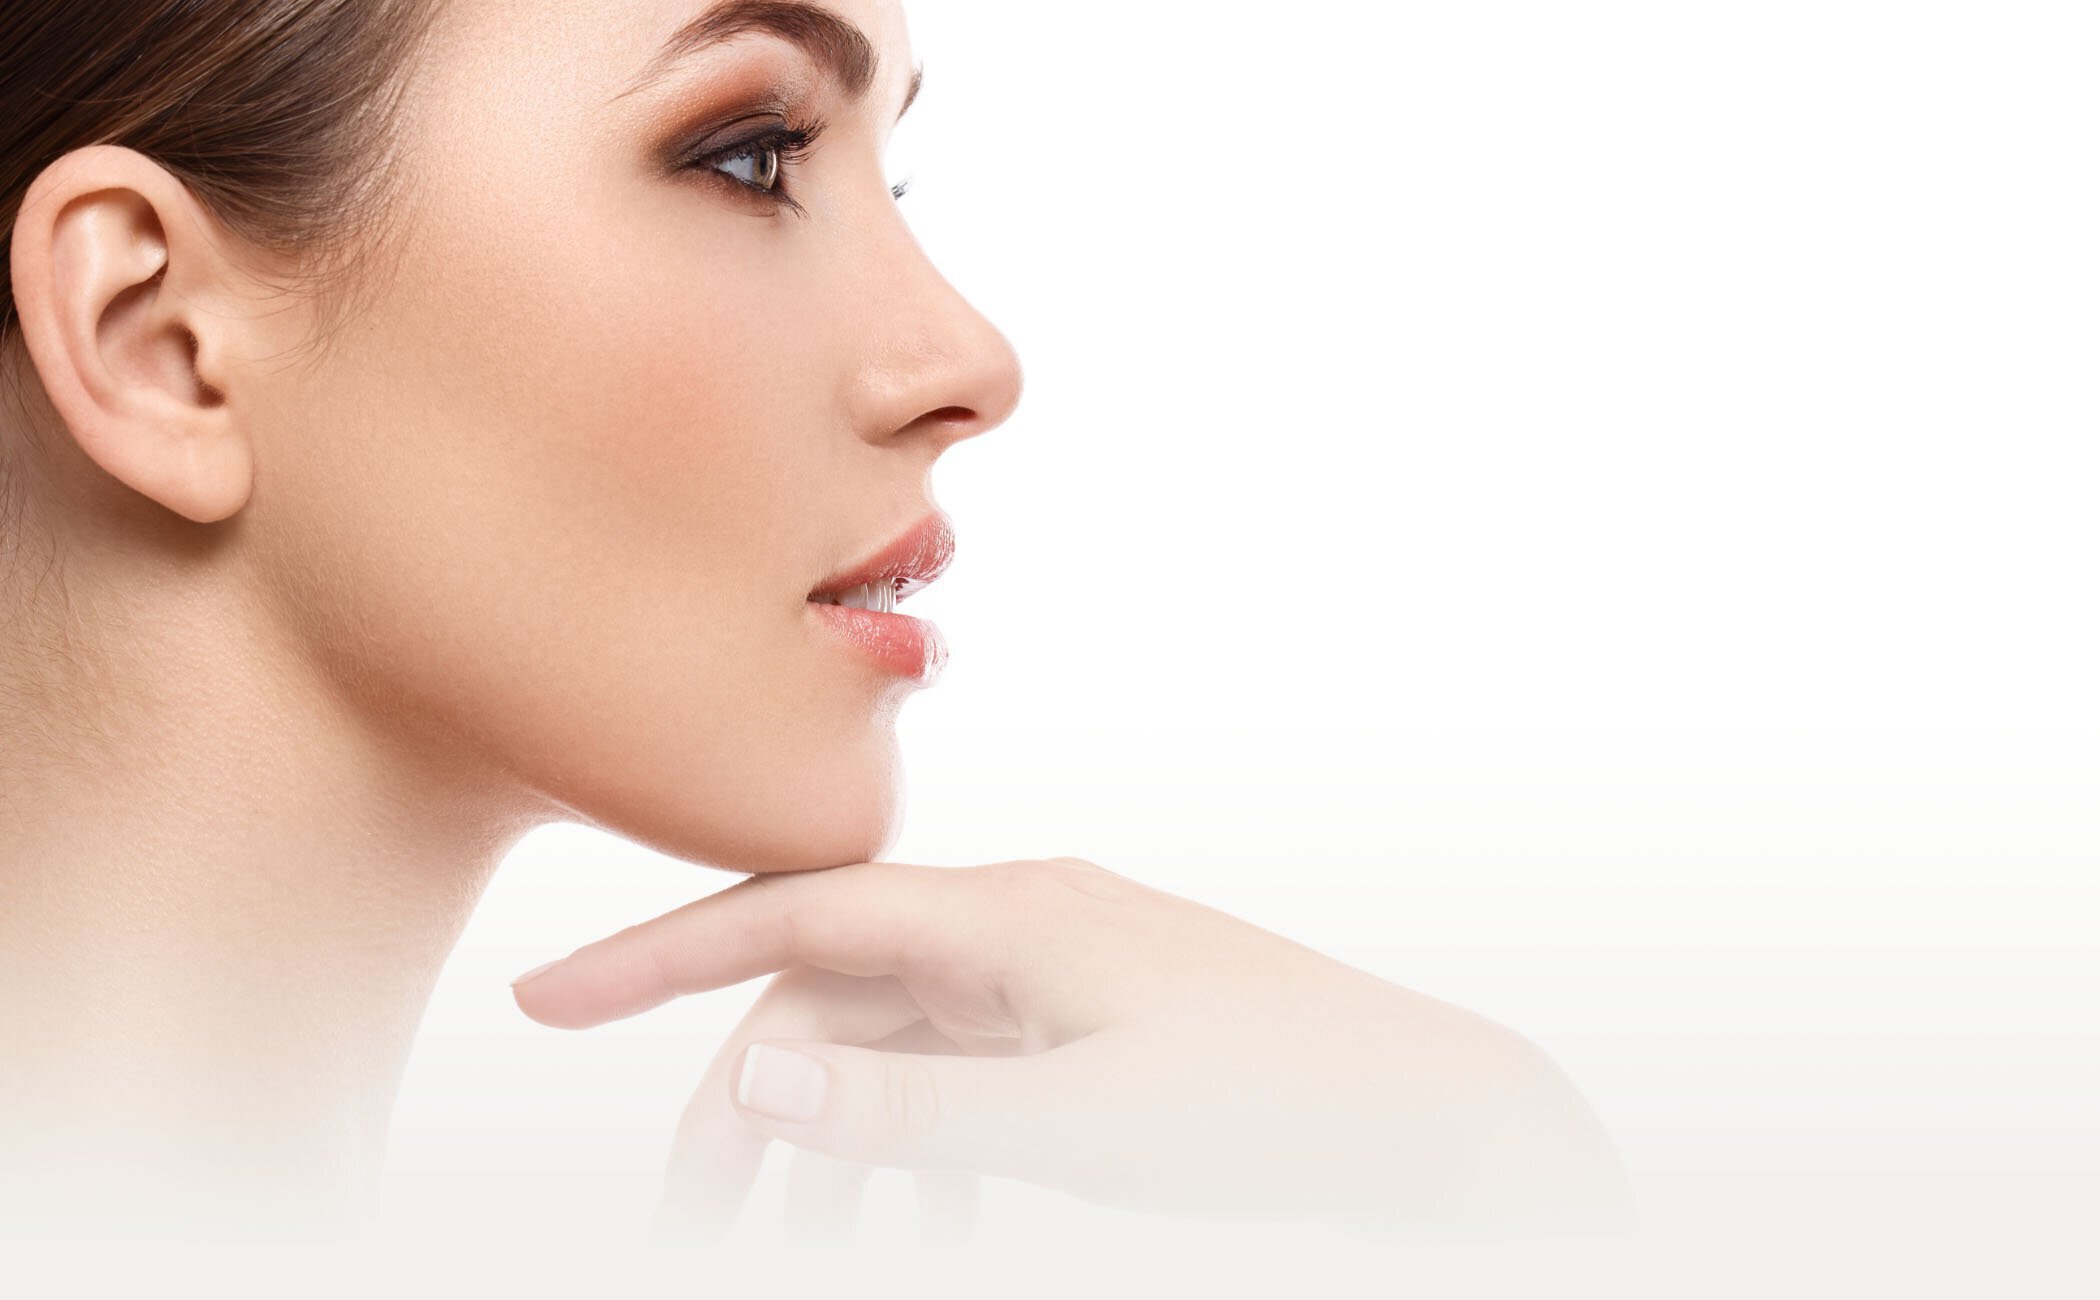 How Many Kybella Treatments to See Results?